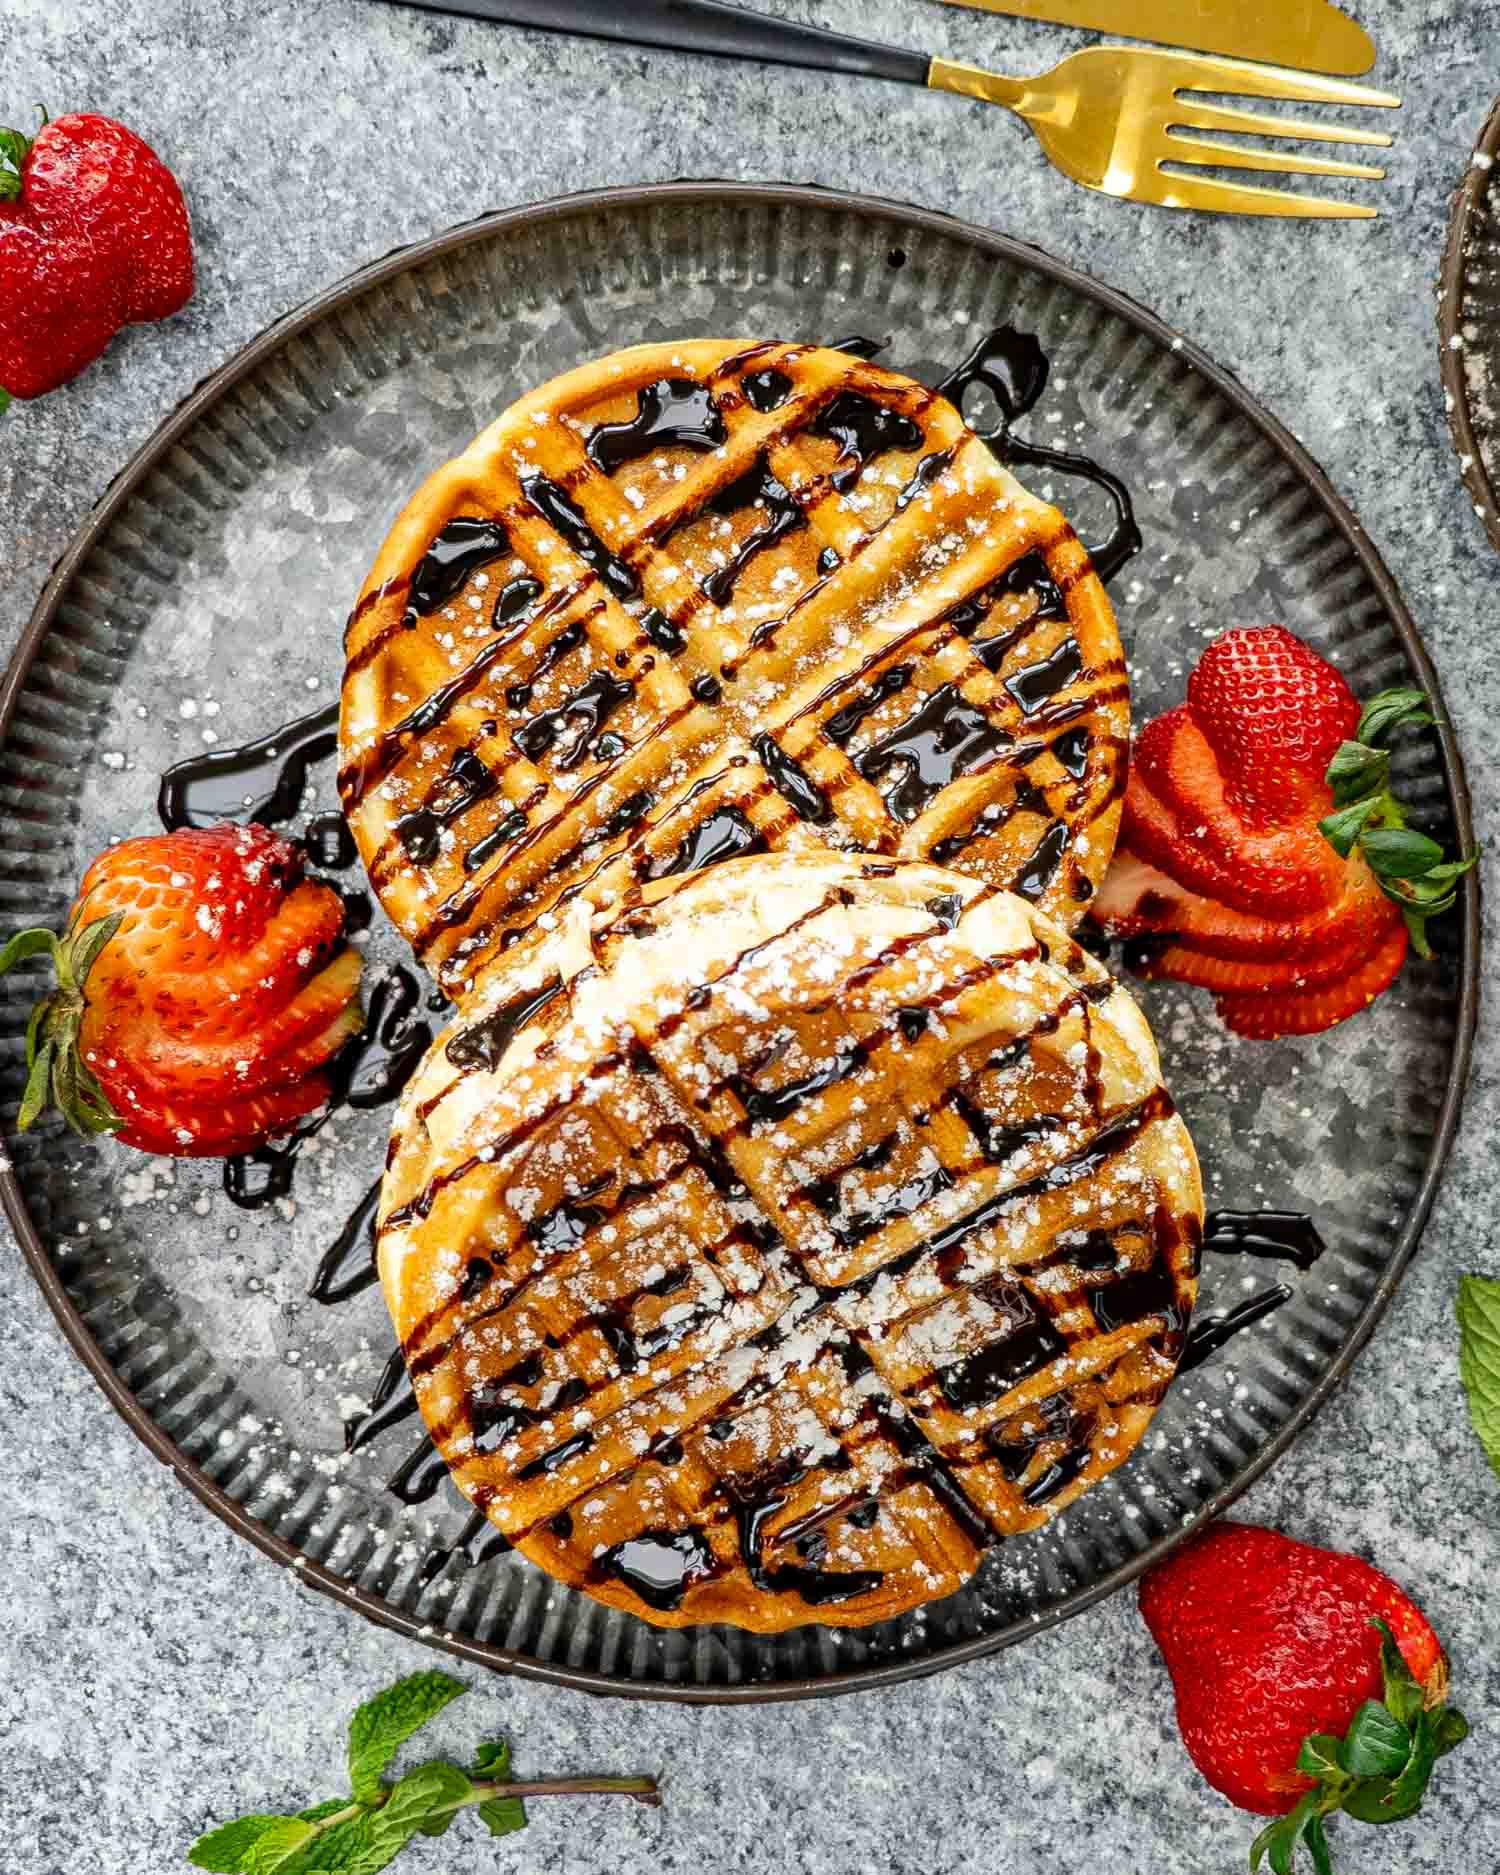 two banana nutella stuffed waffles on a nice metal plate drizzled with chocolate syrup and powdered sugar, along some sliced strawberries.